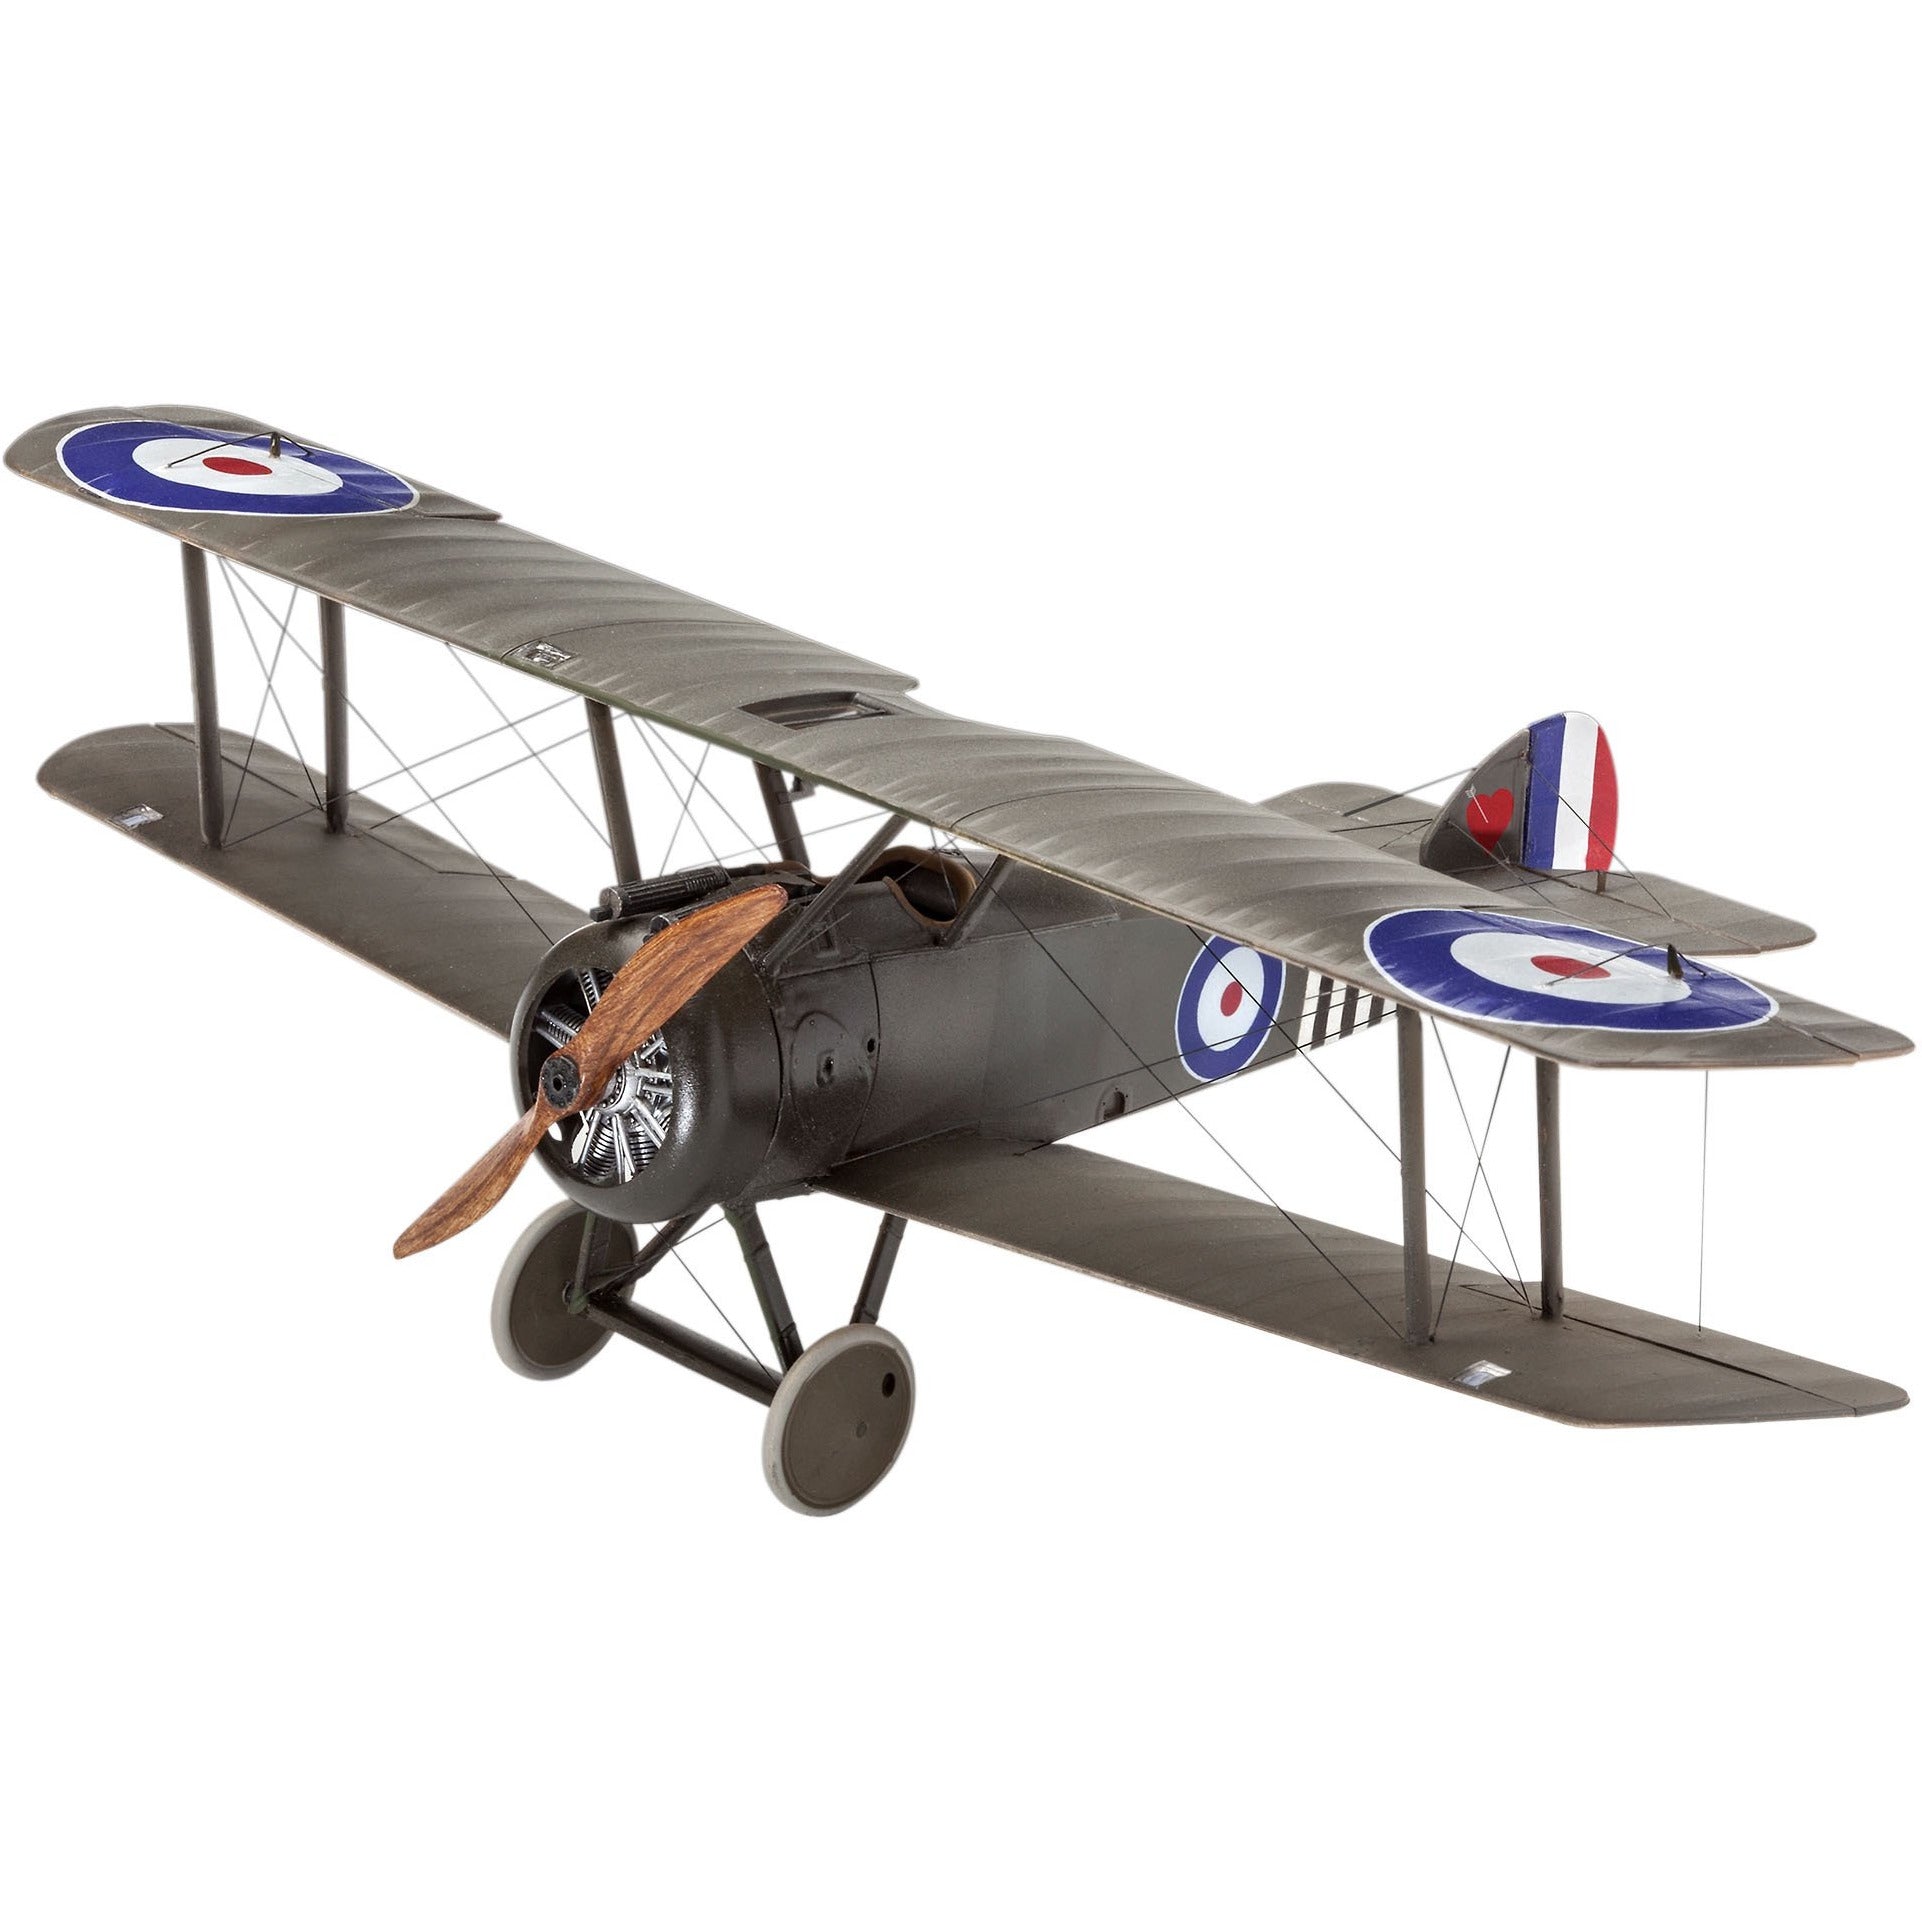 Sopwith F.1 Camel 1/48 by Revell